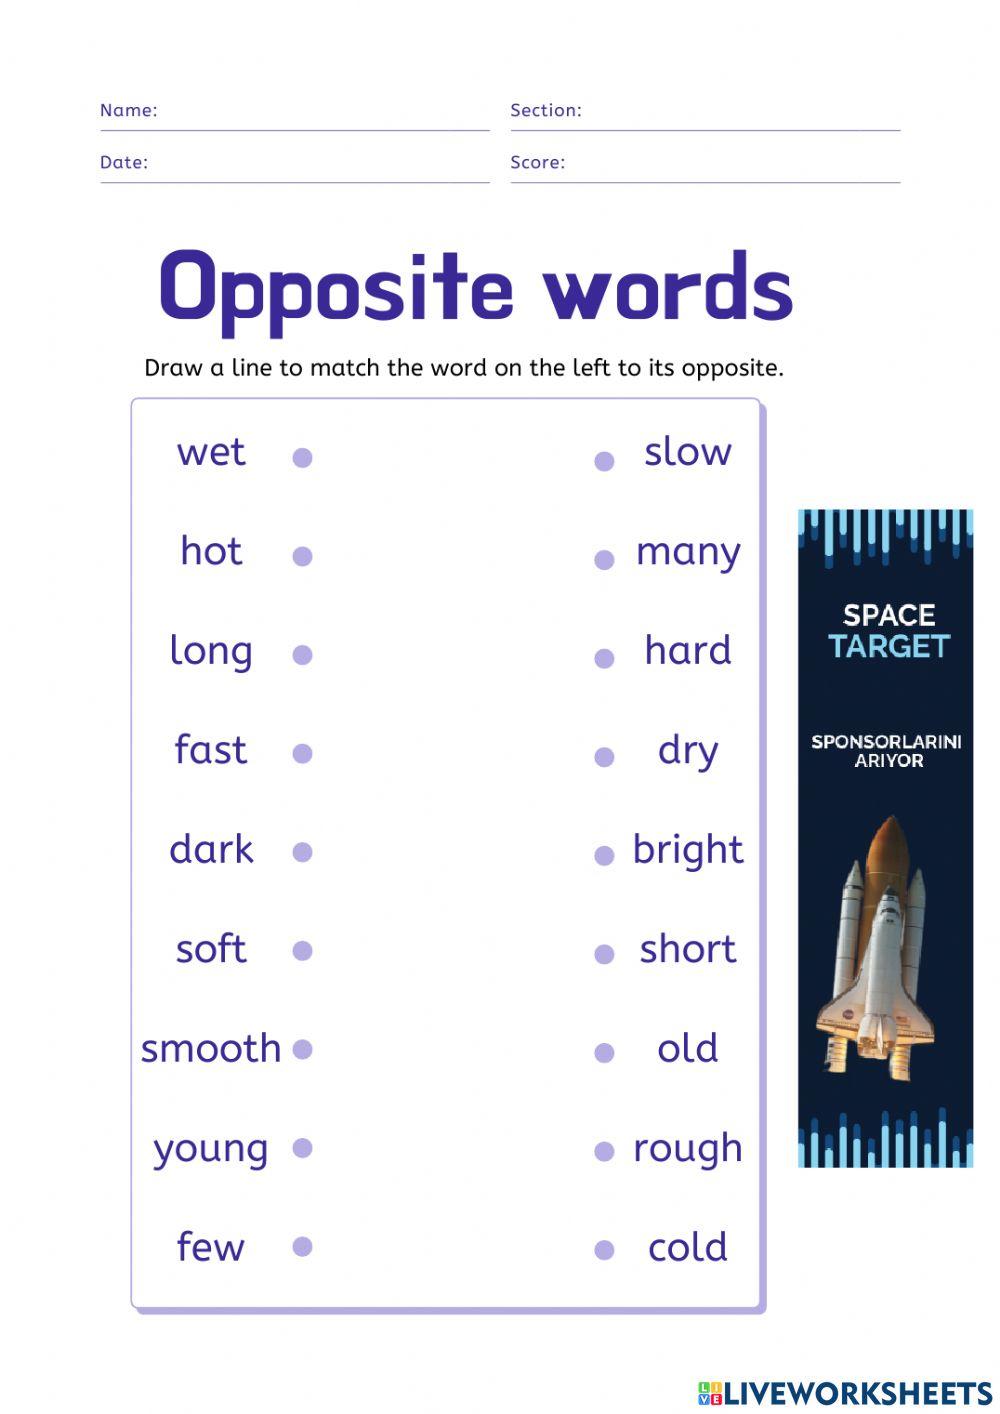 SYNONYMS AGAIN online exercise for